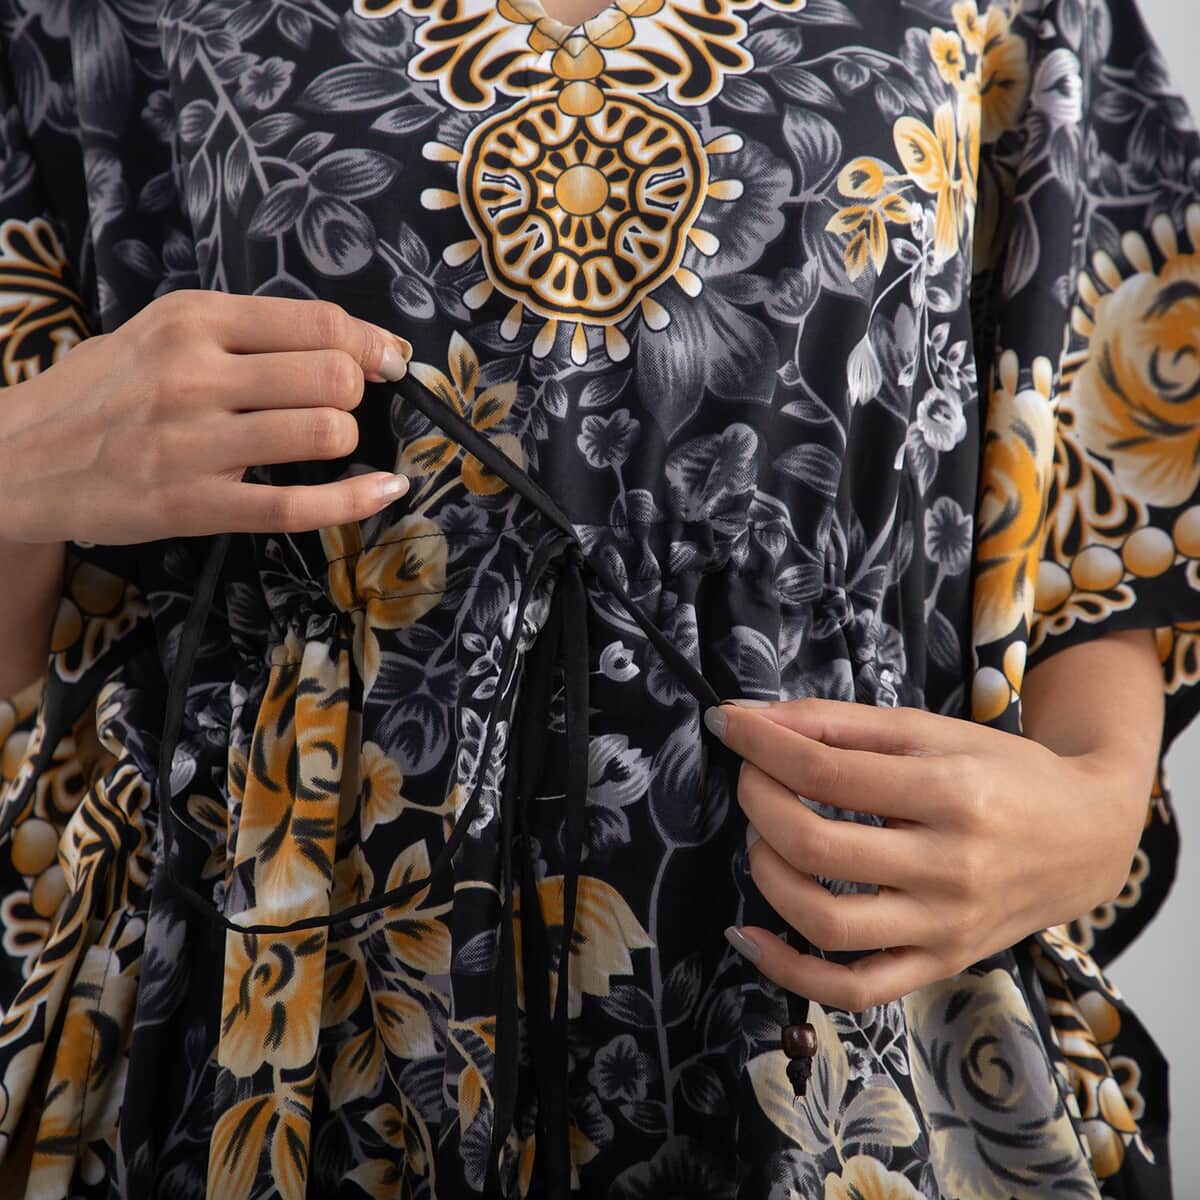 TAMSY Gray Floral Print 100% Polyester V-neck Kaftan with Pockets - One Size Fits Most (36"x41") image number 4